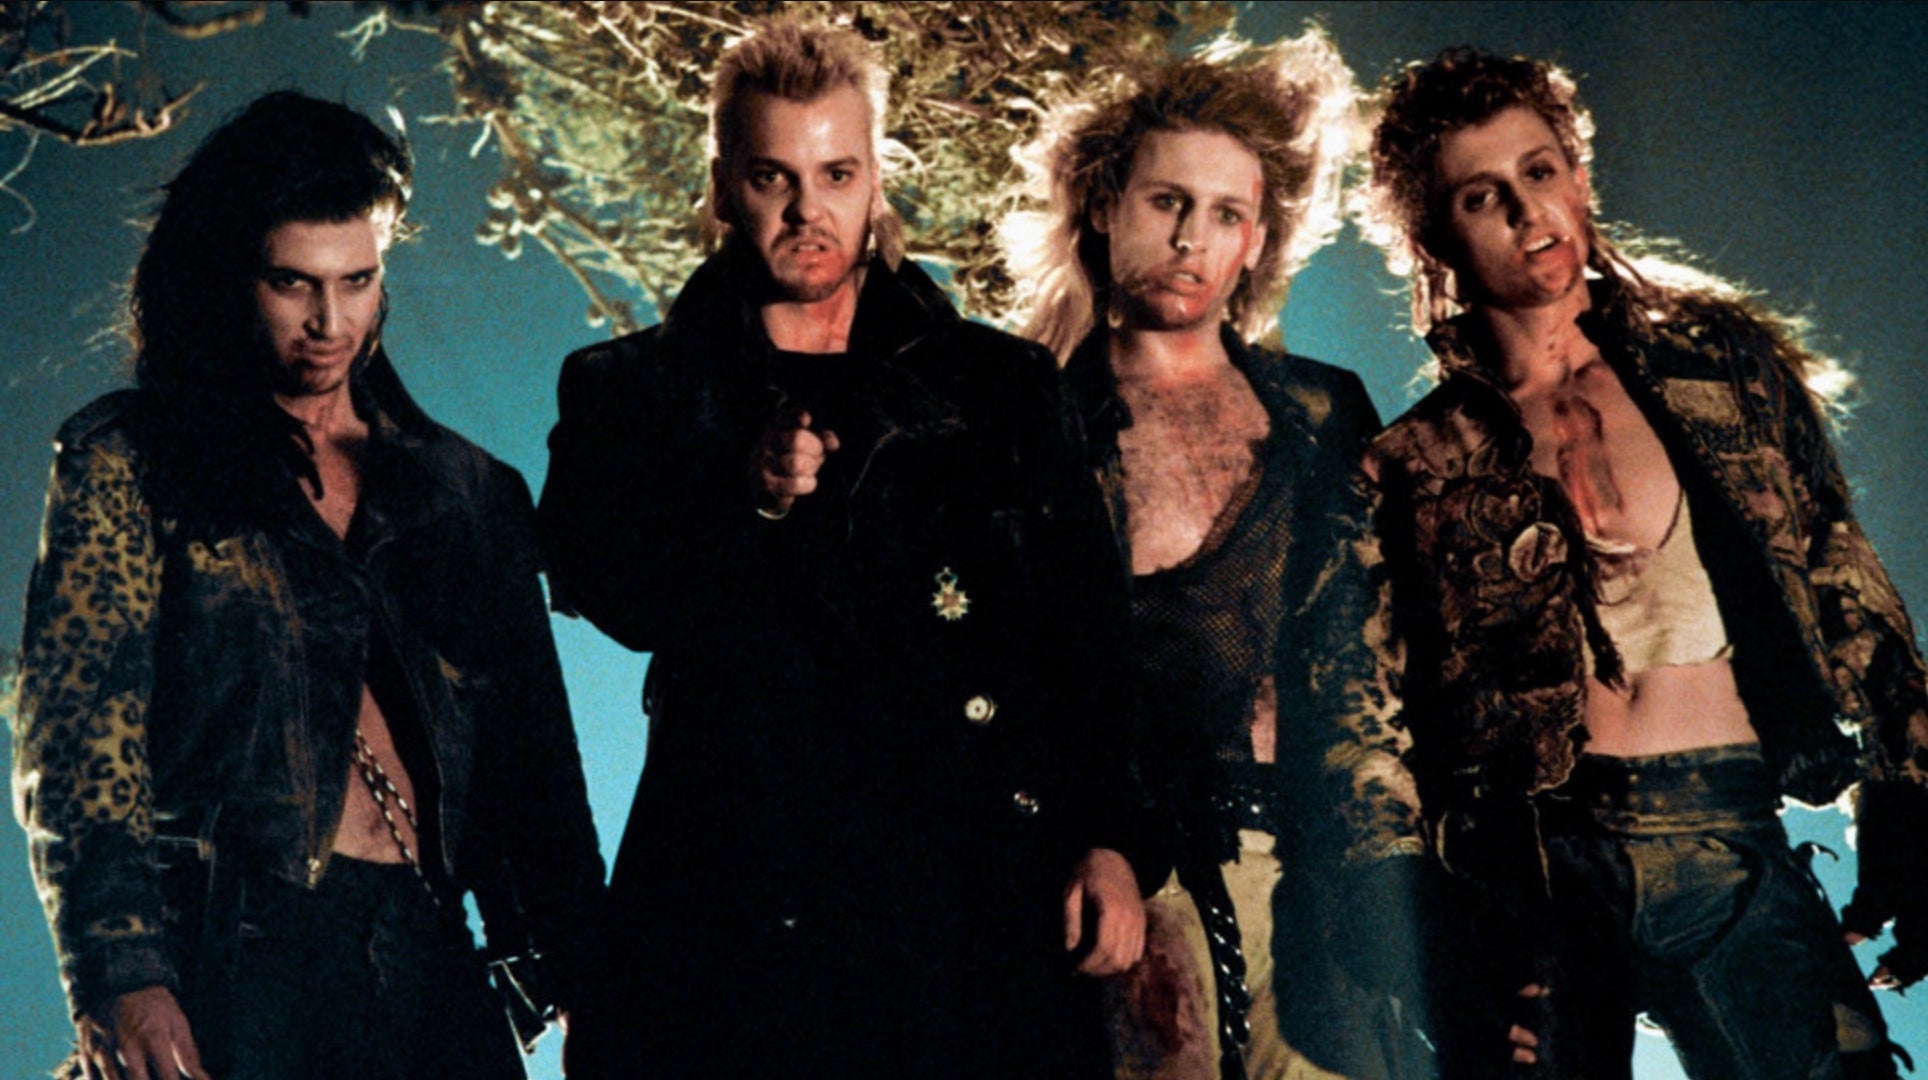 The Lost Boys of The Lost Boys. (Image: Warner Bros.)